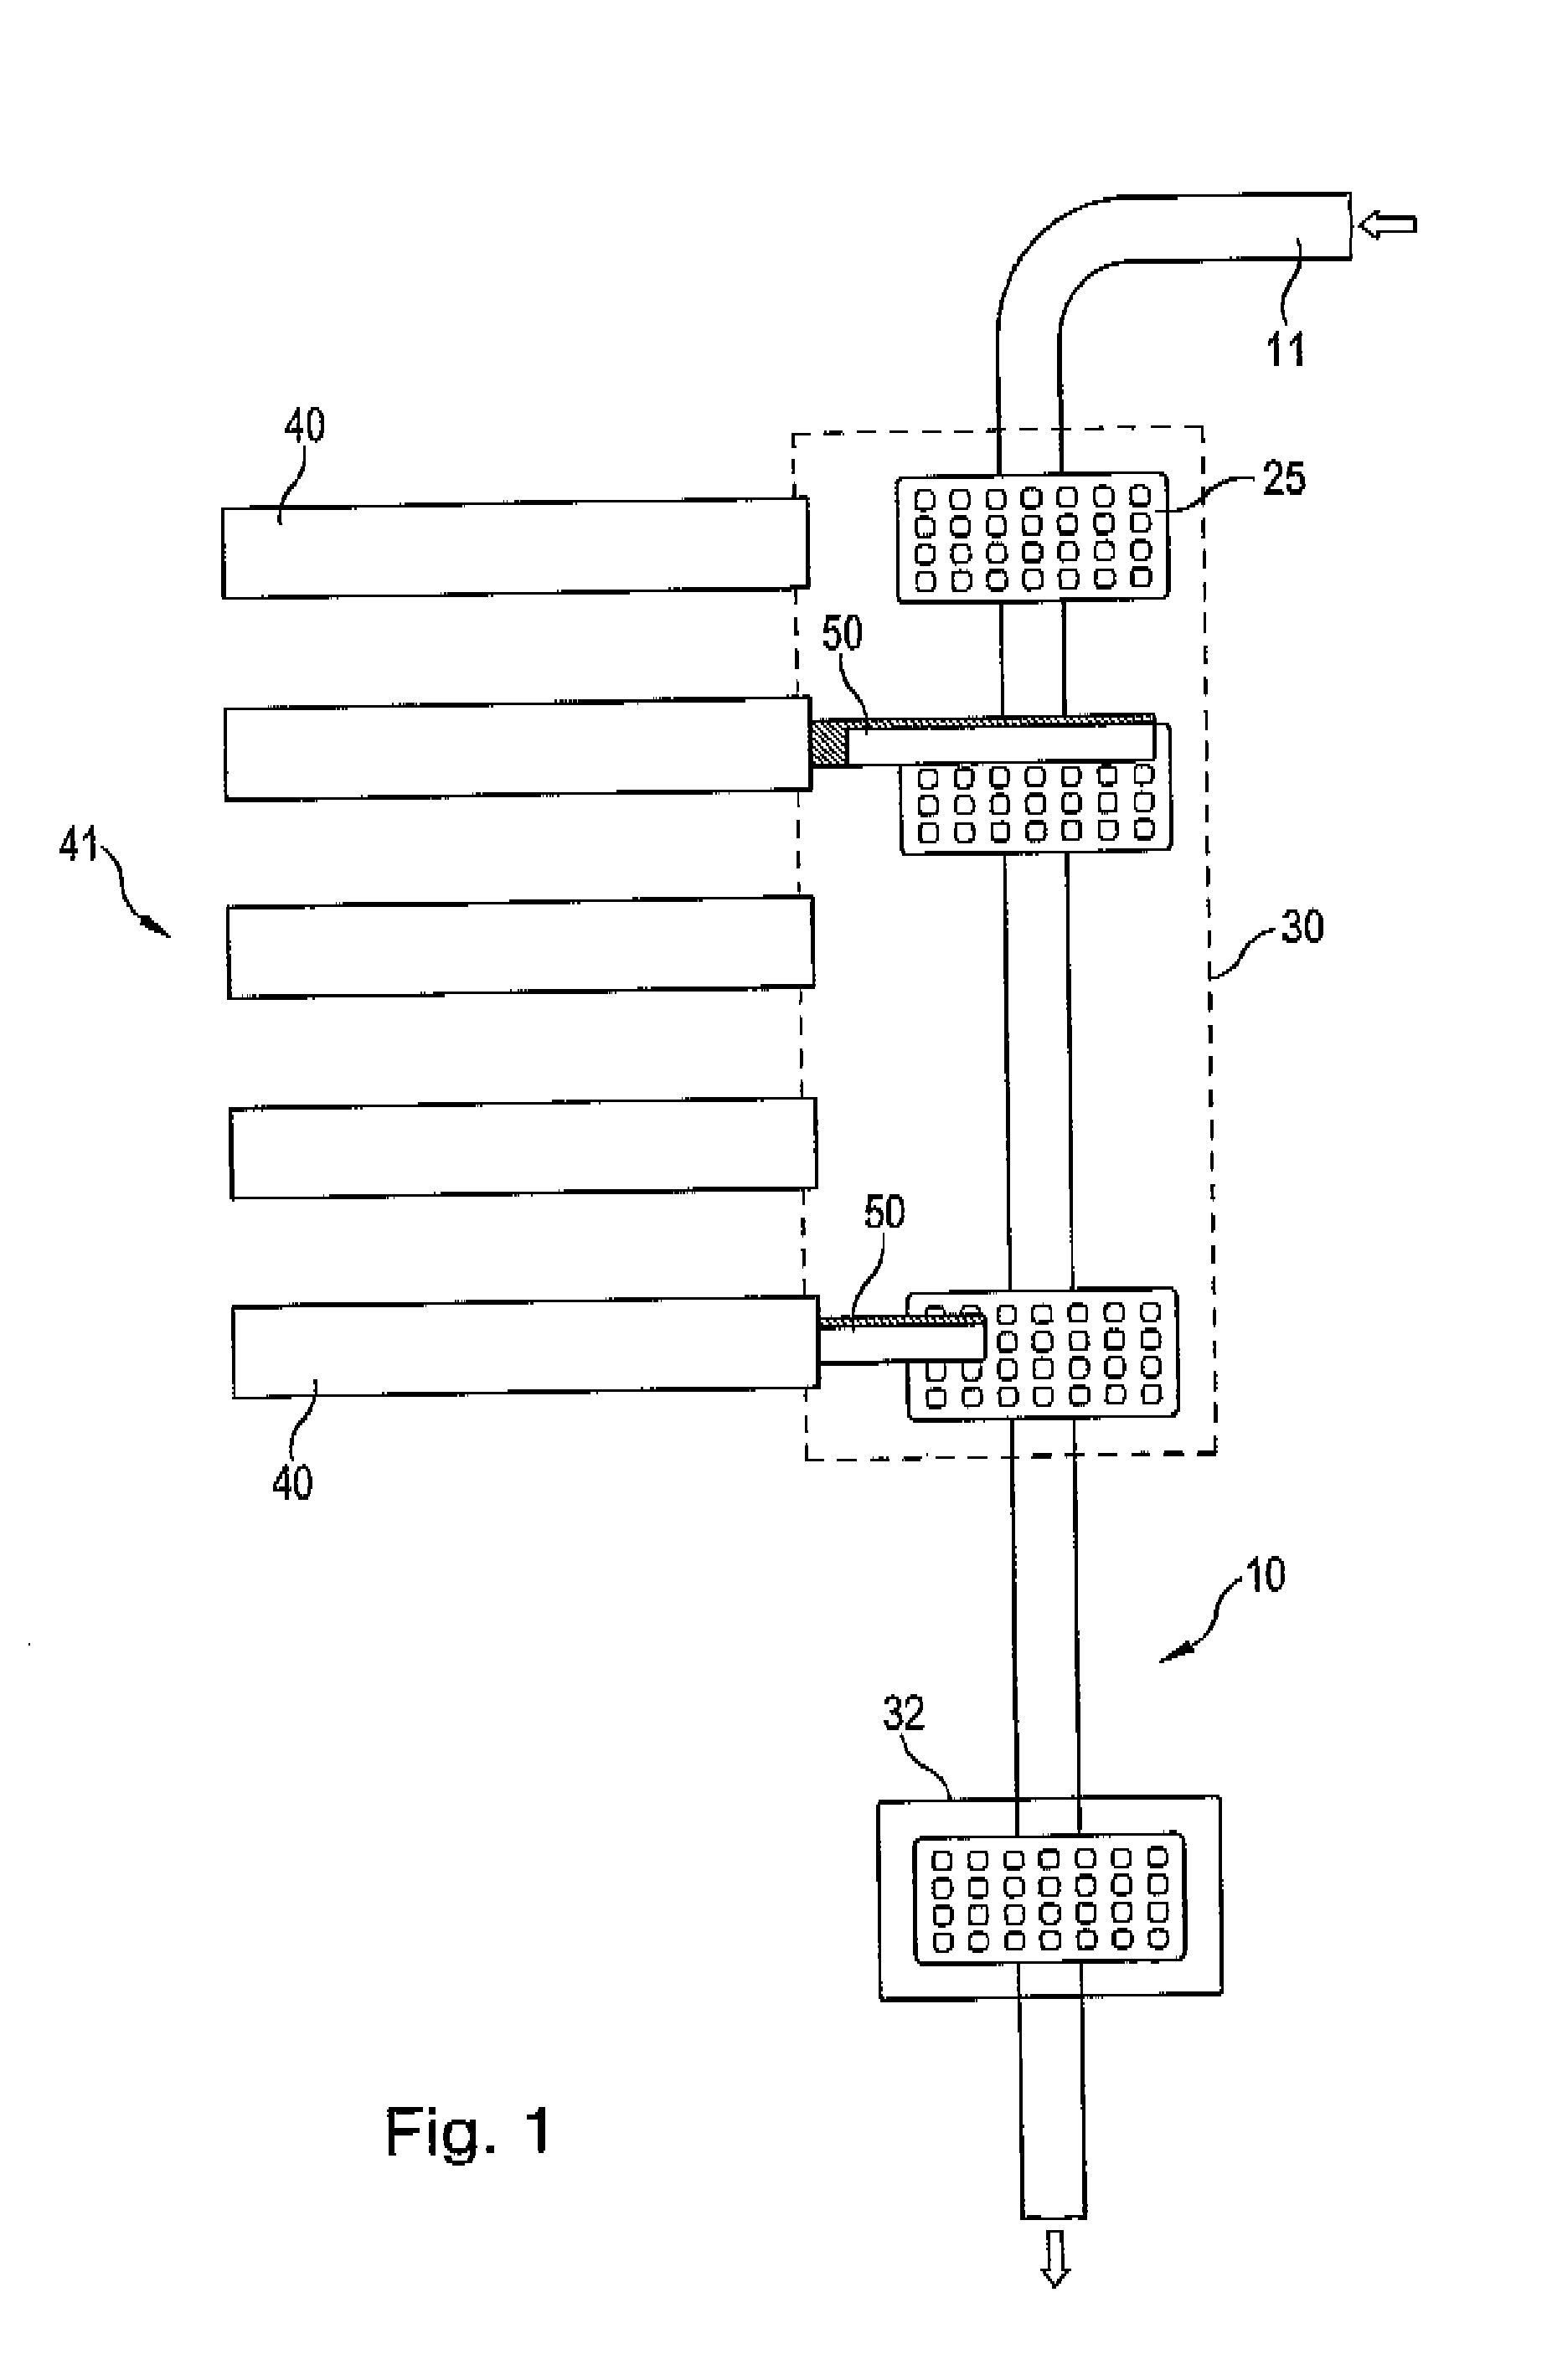 Installation and method for individually tailored filling of blister packs with medication according to predetermined prescription data